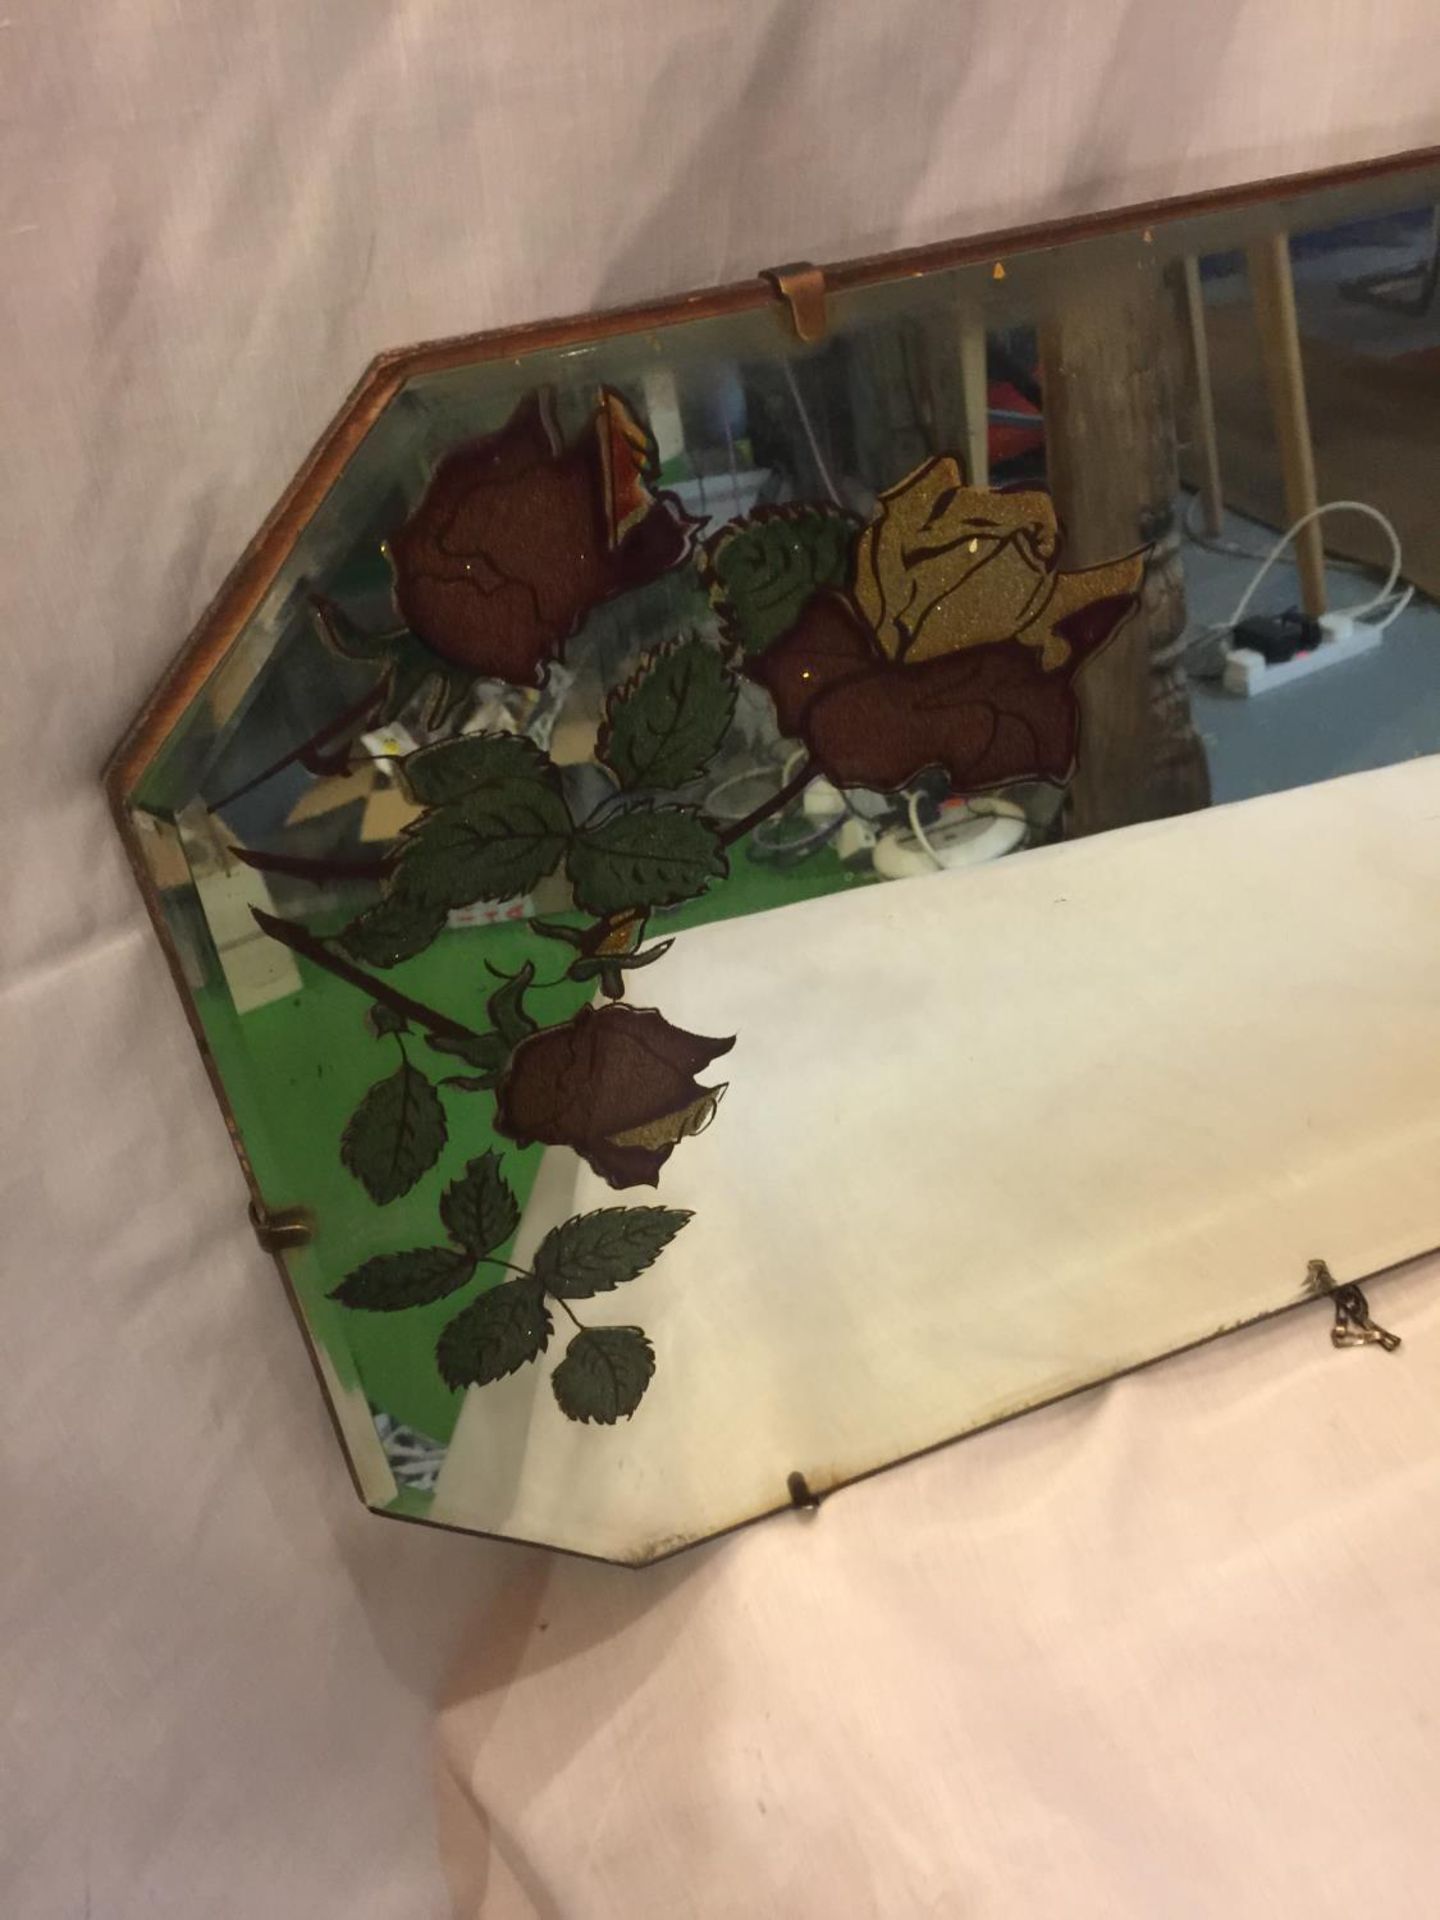 A DECORATIVE VINTAGE BEVELLED MIRROR WITH A ROSE DECORATION - Image 2 of 2